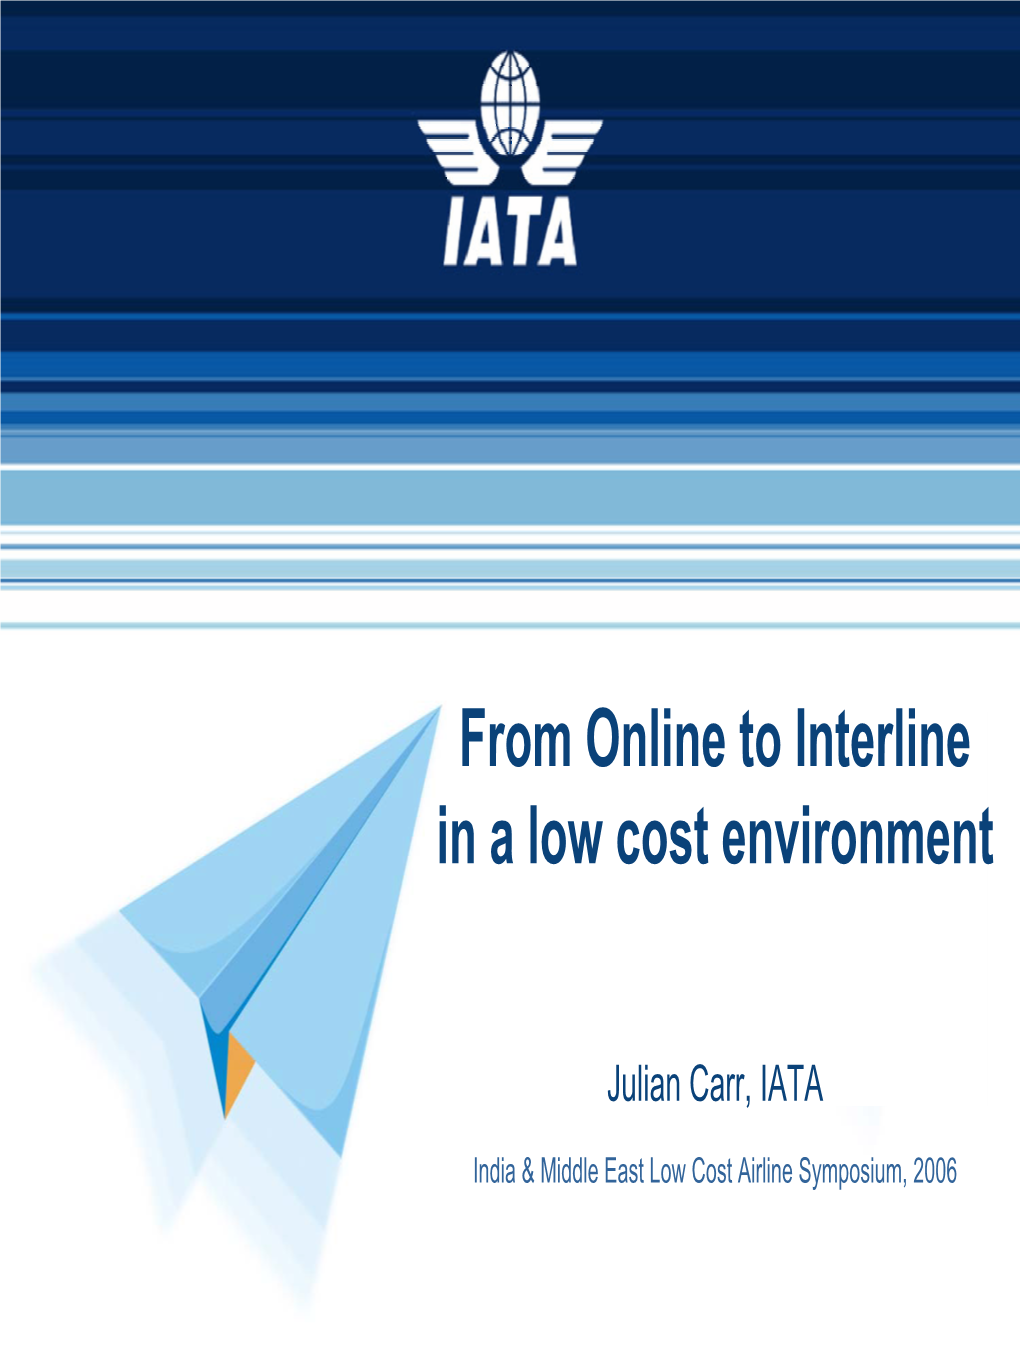 From Online to Interline in a Low Cost Environment